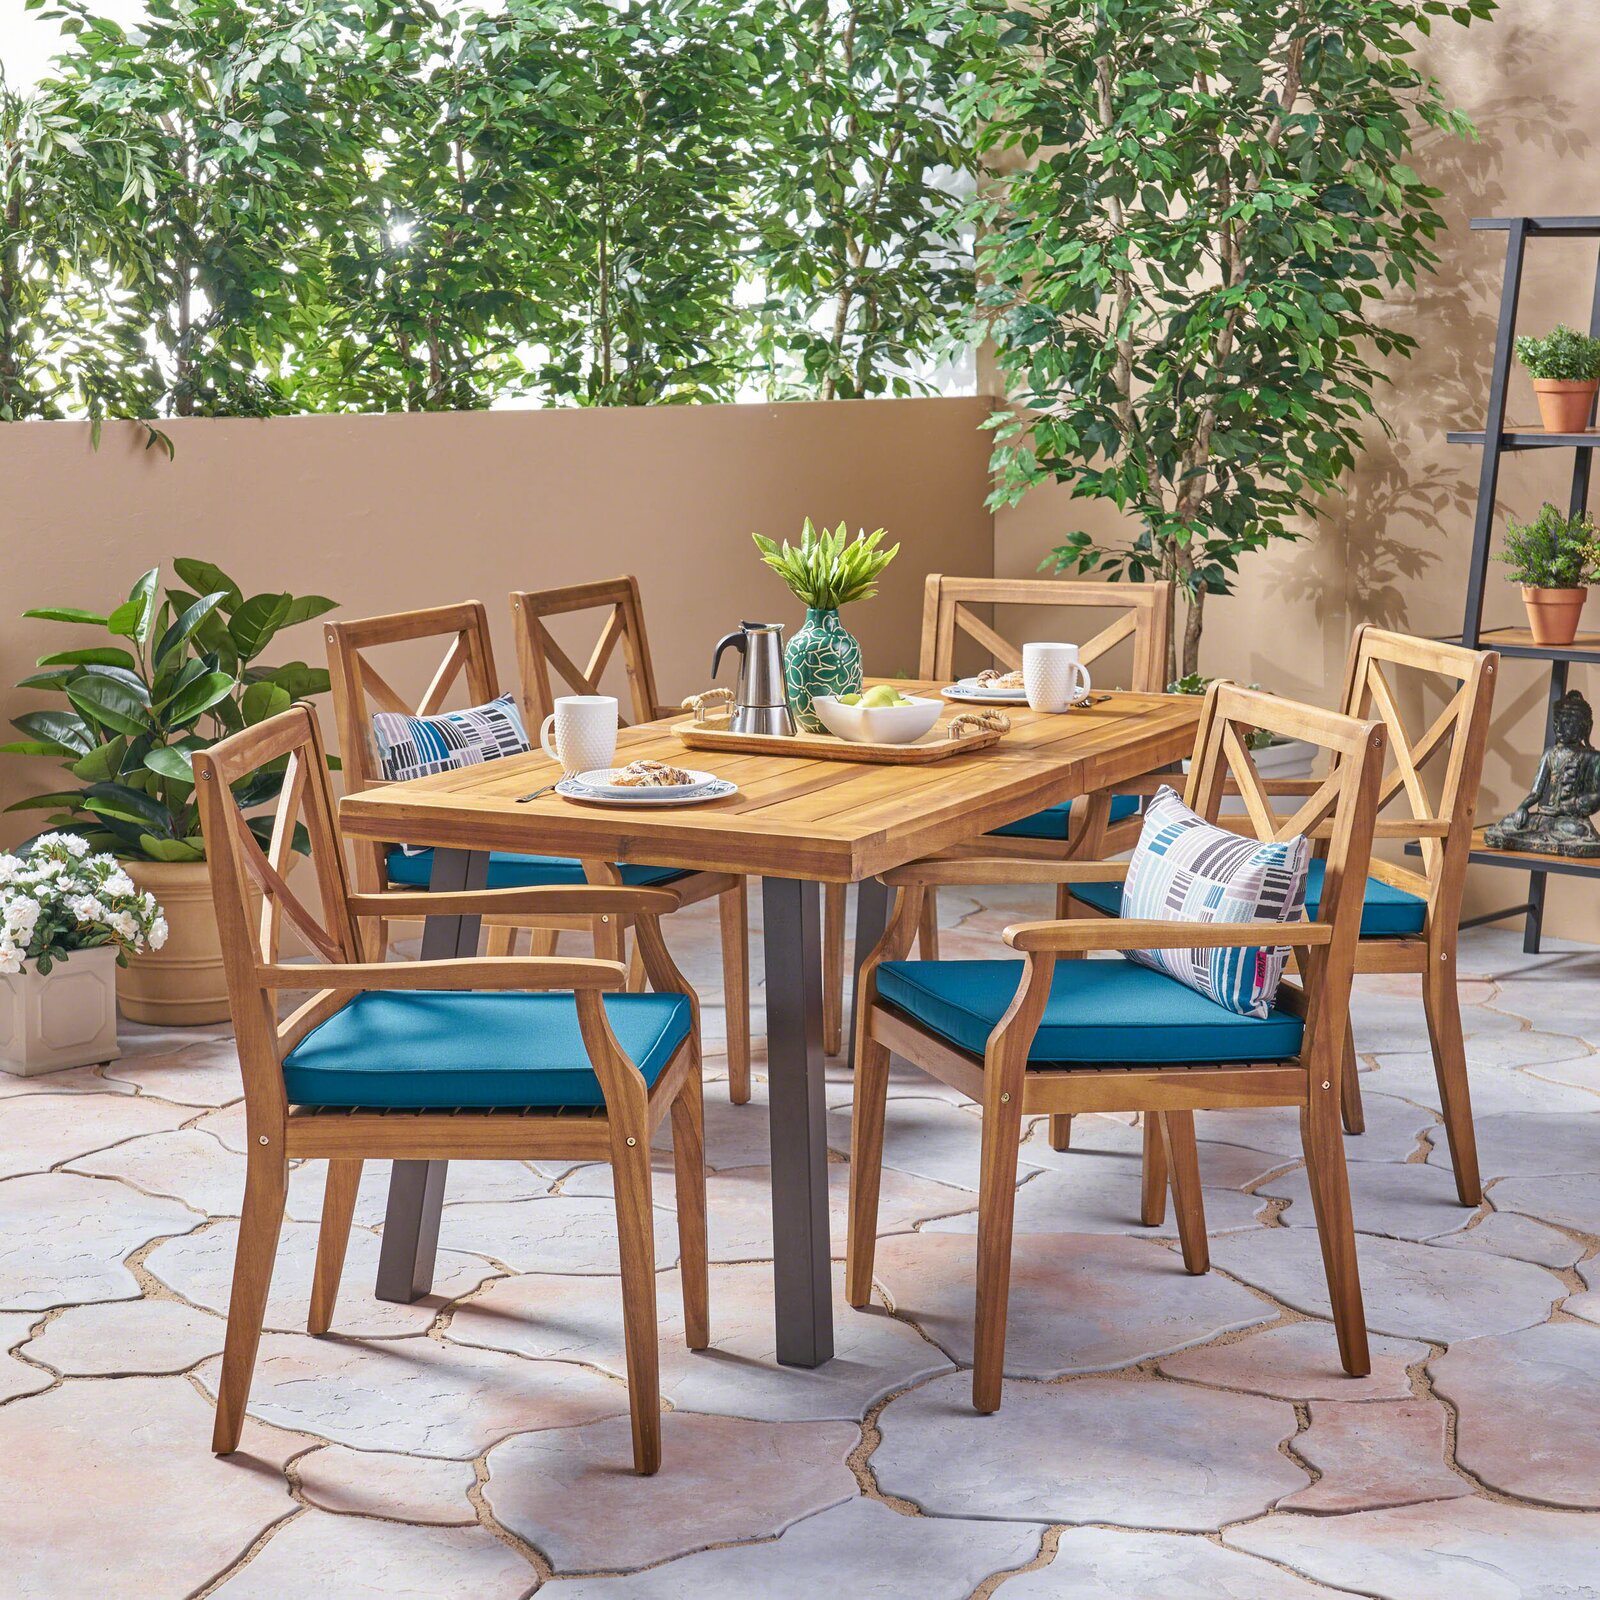 Whalan Outdoor 7 Piece Dining Set with Cushions, Product Weight: 155.4, Pieces Included: 1 Outdoor dining table and 6 outdoor dining chairs - image 1 of 6